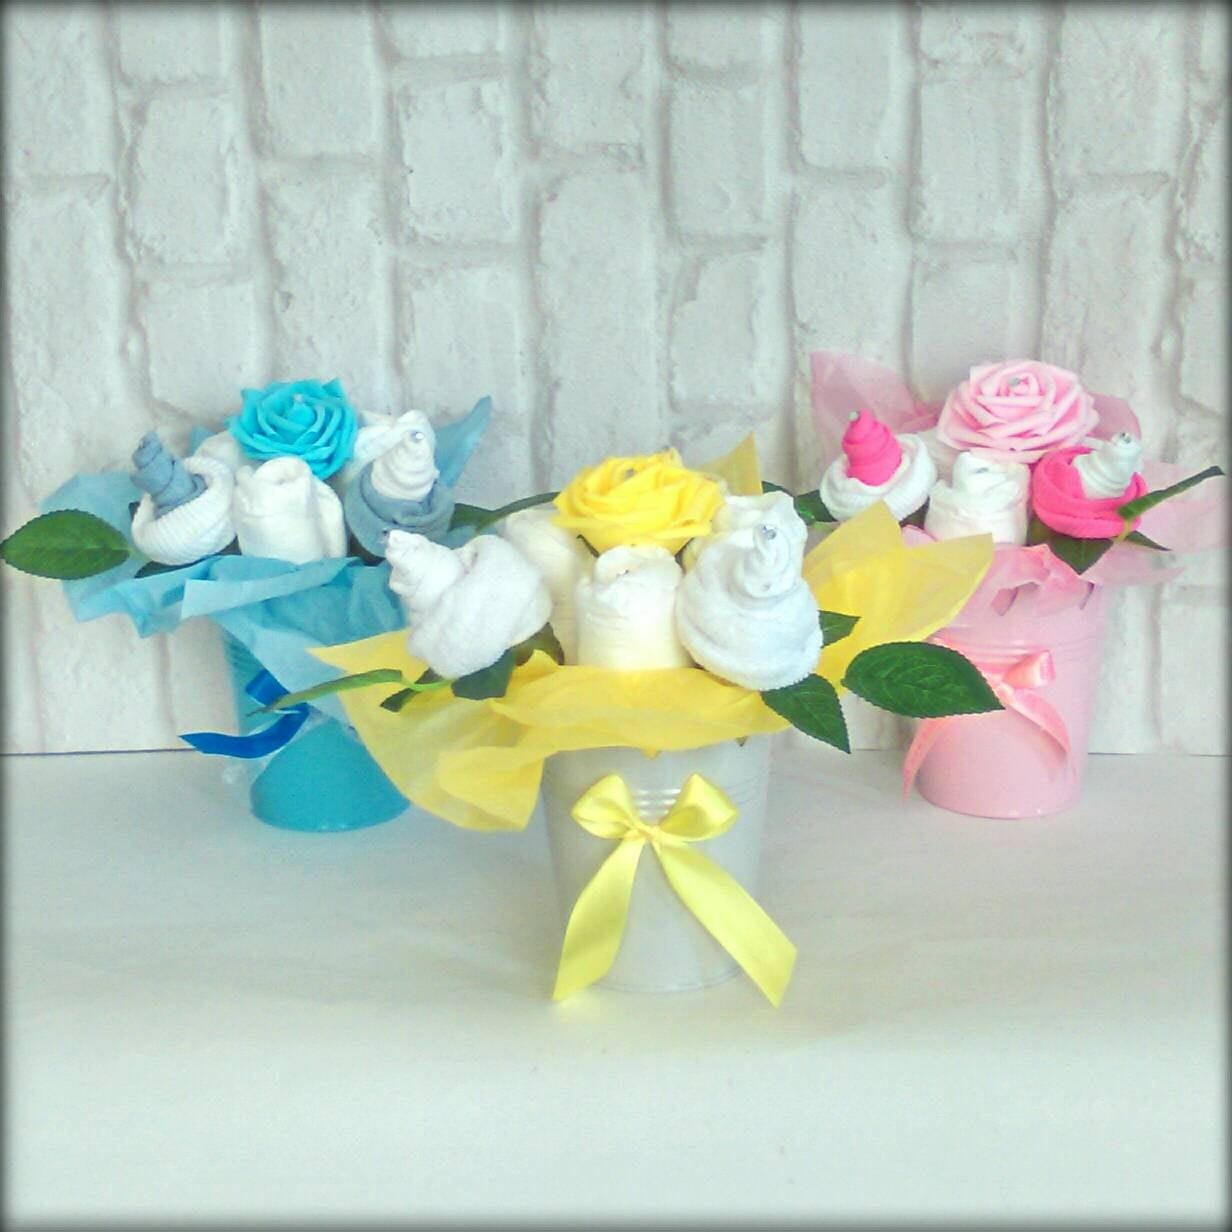 Essential Baby Shower Gifts
 Baby Shower baby essentials flower pot t maternity leave